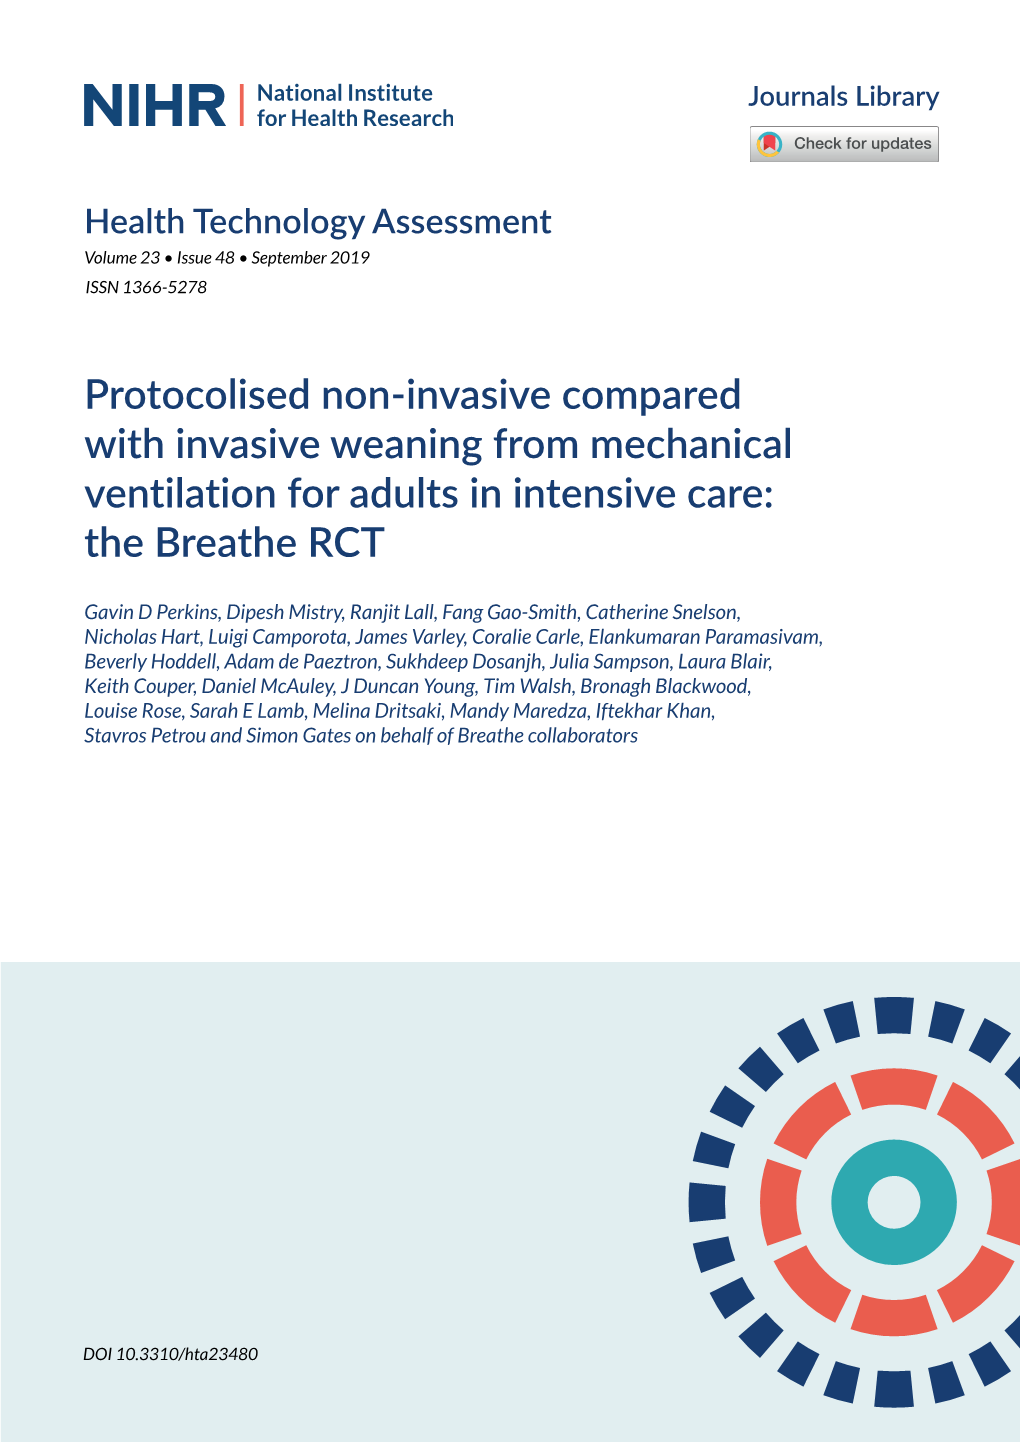 Protocolised Non-Invasive Compared with Invasive Weaning from Mechanical Ventilation for Adults in Intensive Care: the Breathe RCT